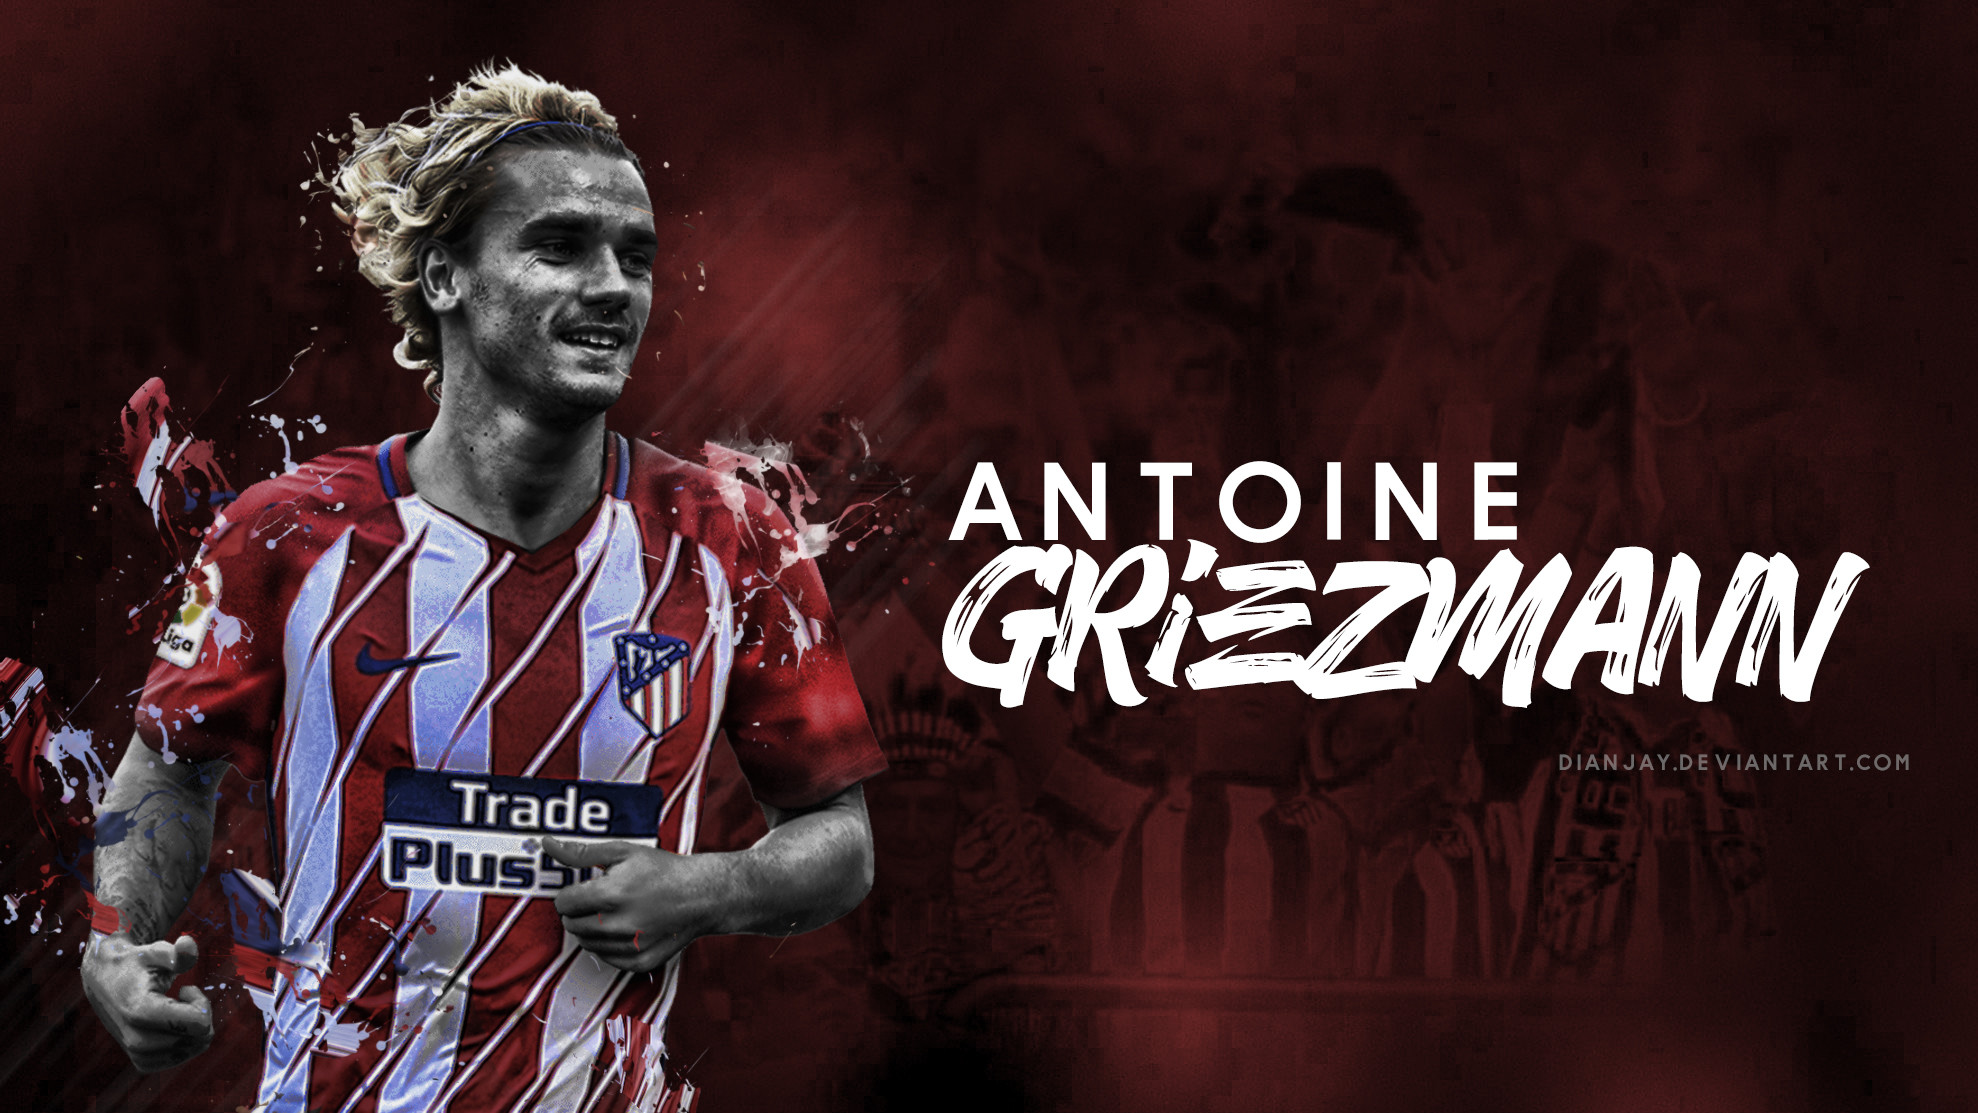 1978x1113 Antoine Griezmann Atletico Madrid Wallpaper by dianjay 